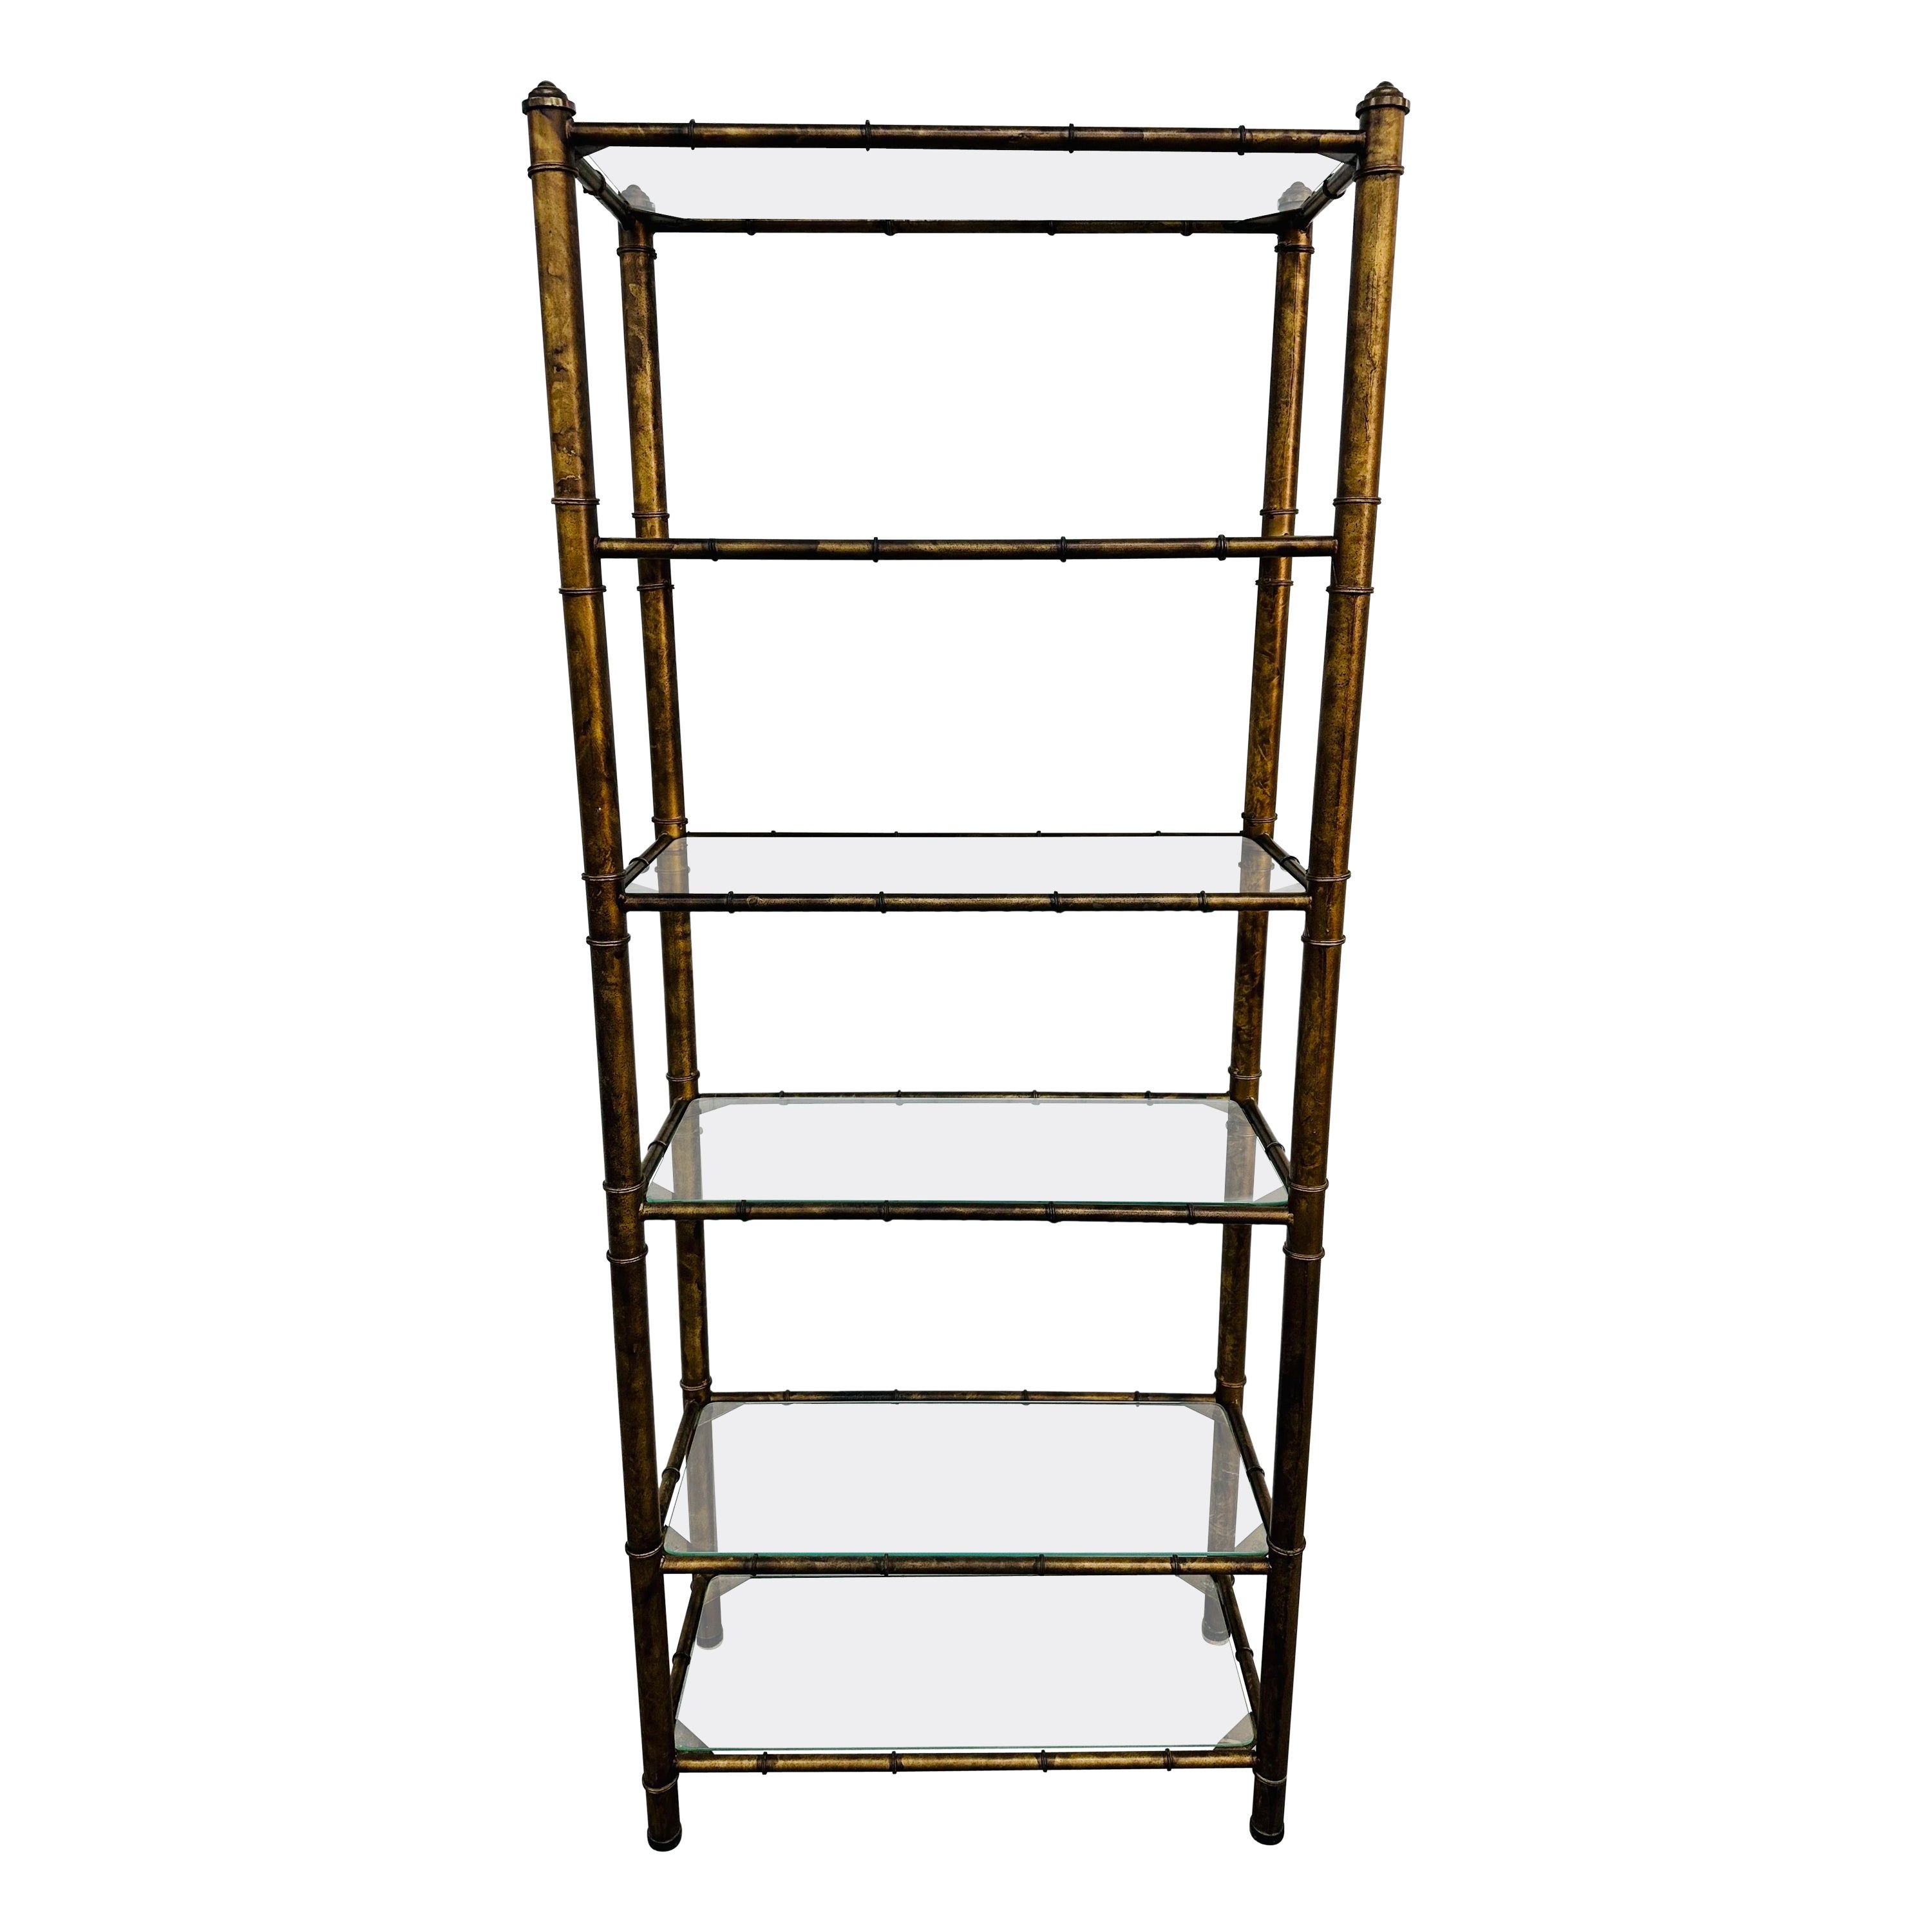 Vintage Faux Bamboo Glass Etagere